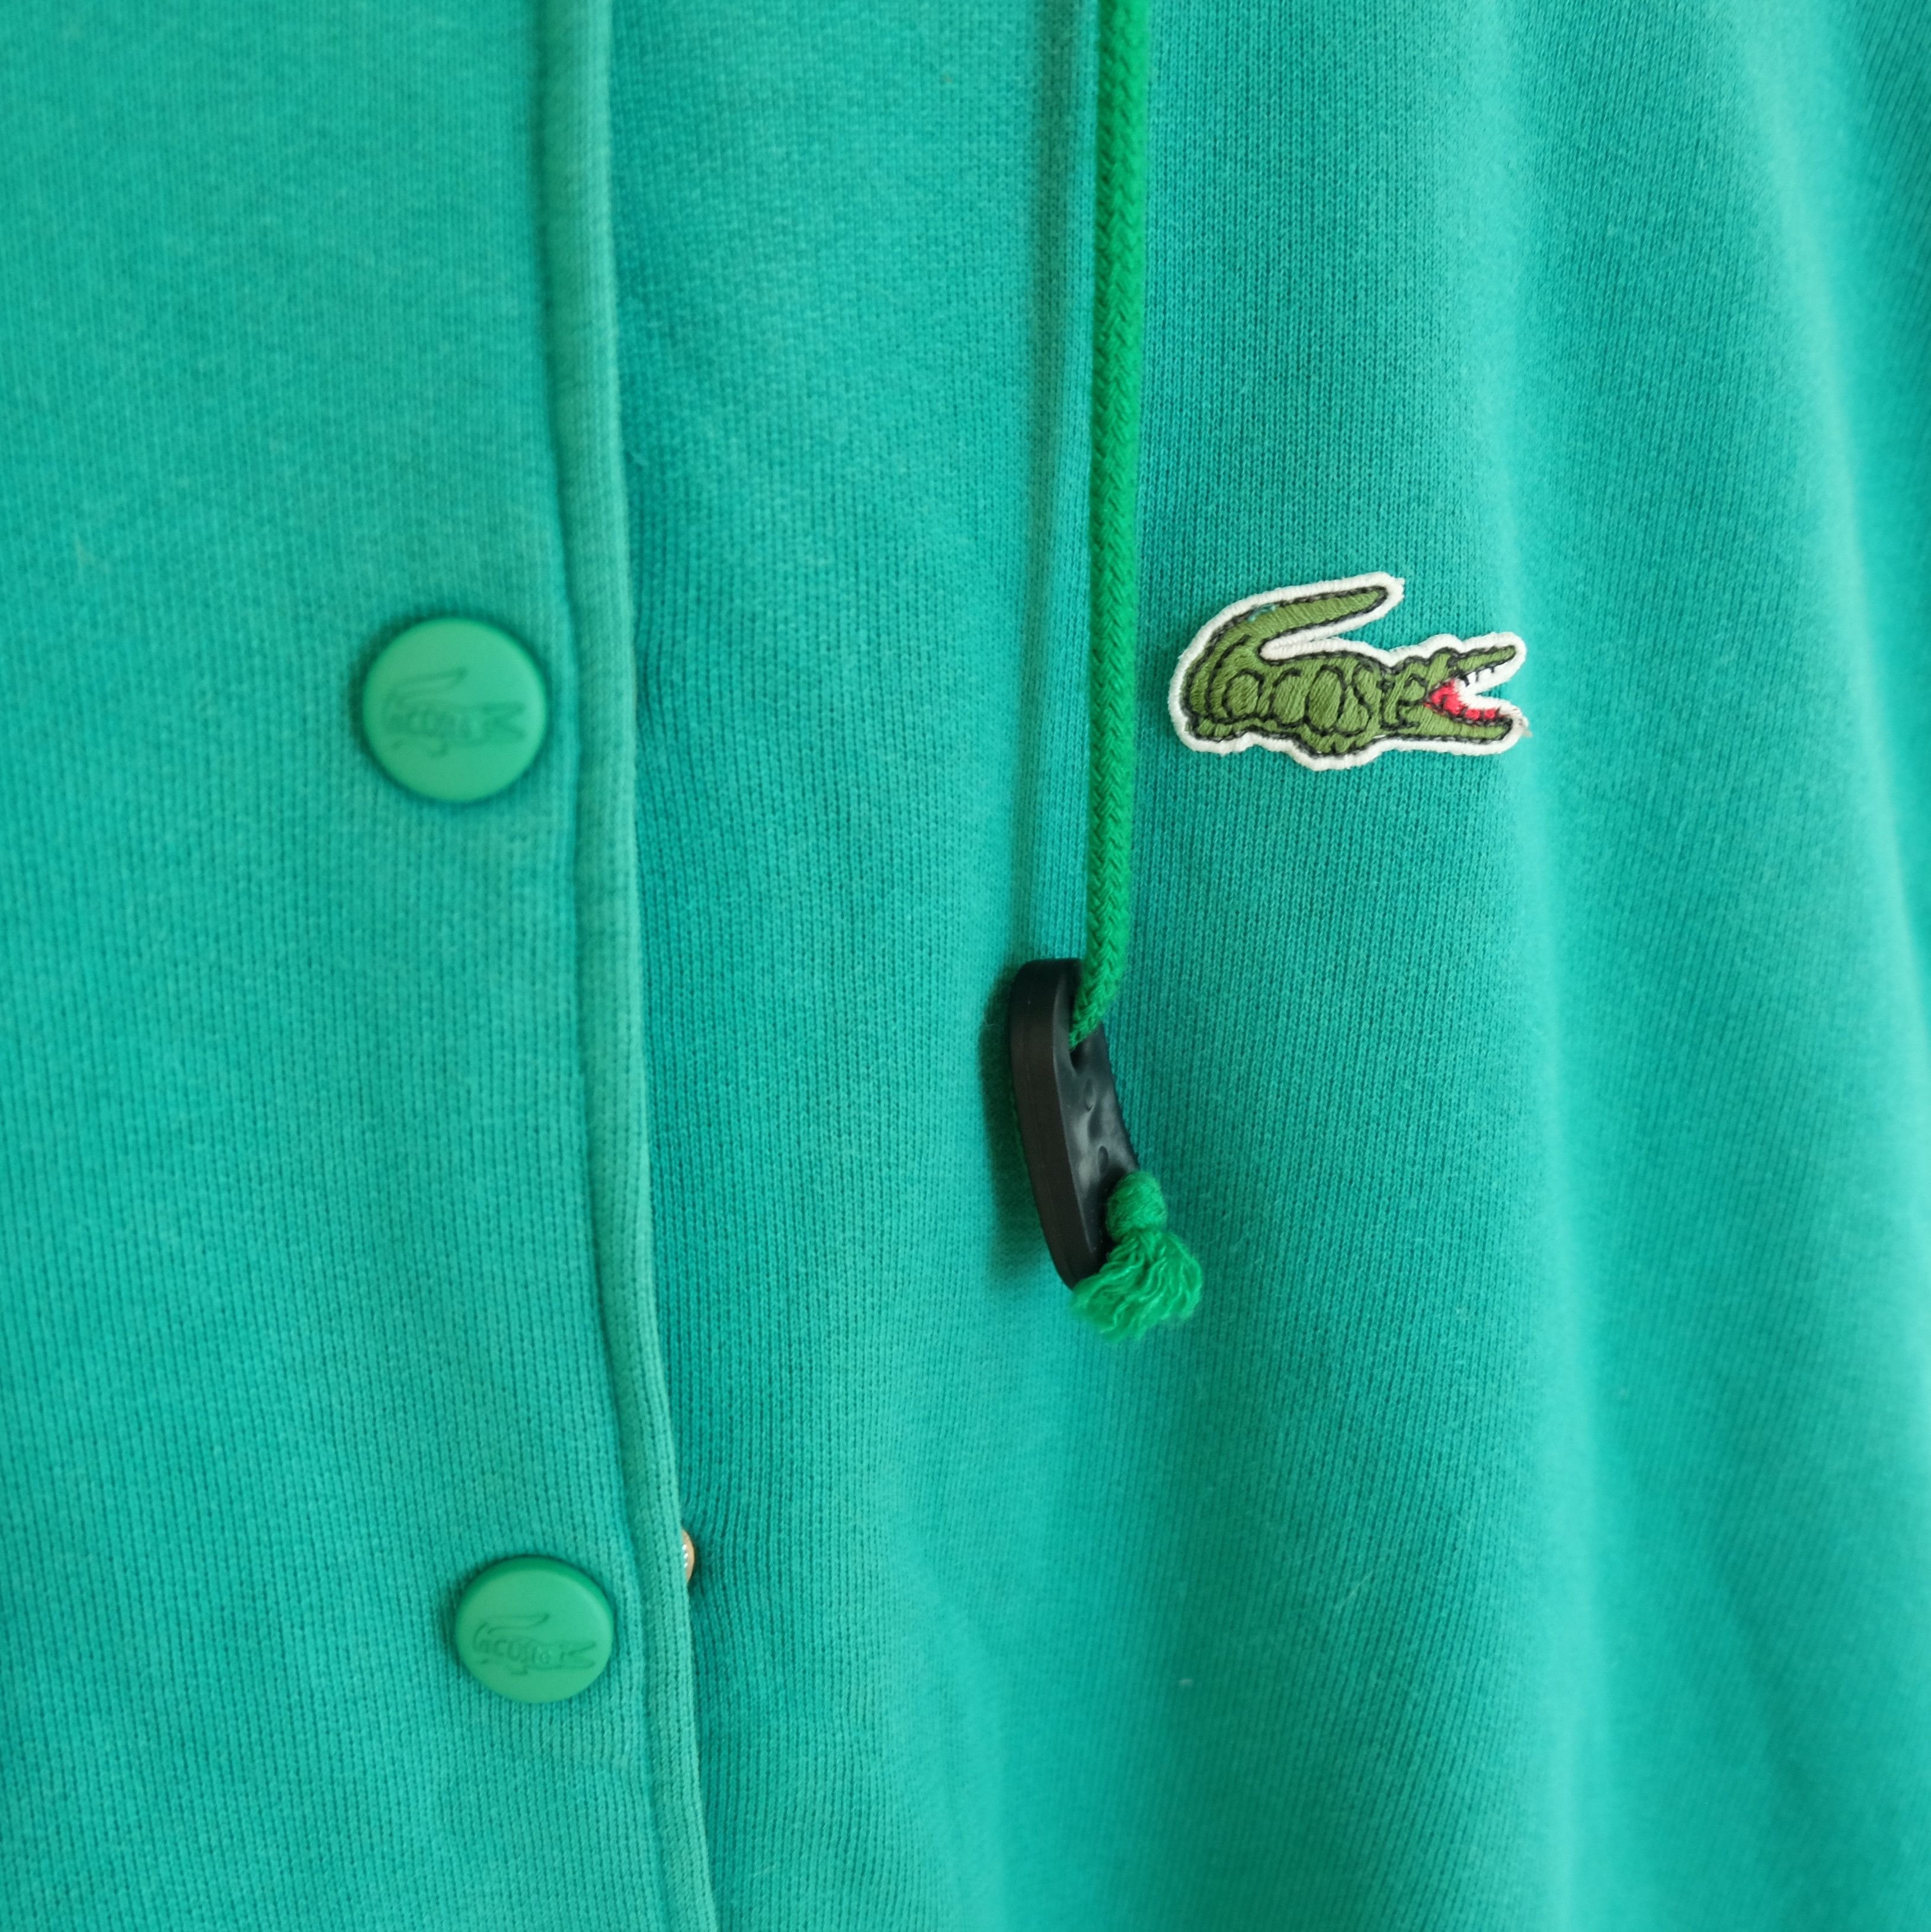 Lacoste LACOSTE Big Spell Out Logo Hoodie Size XL / US 12-14 / IT 48-50 - 7 Thumbnail